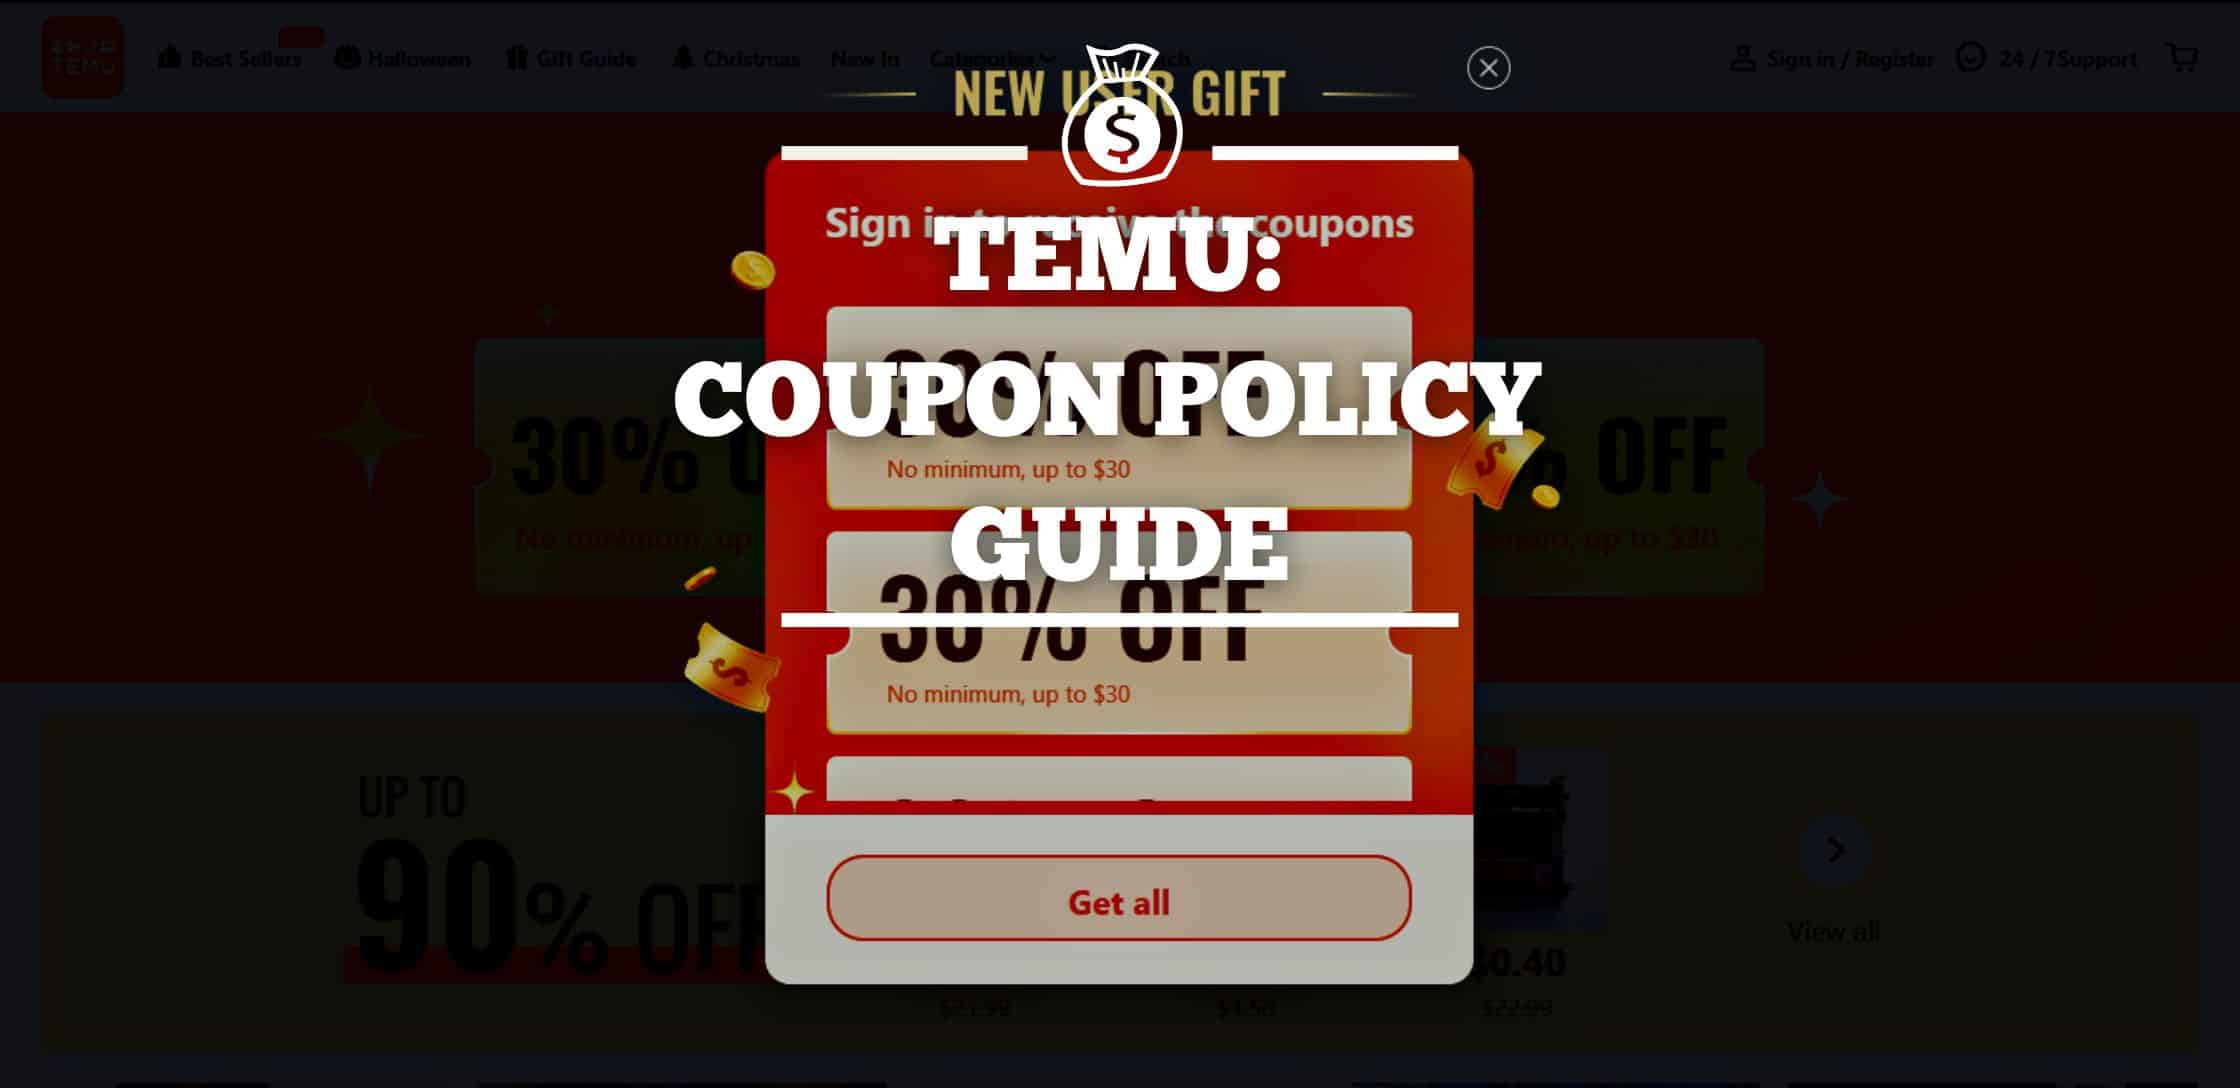 The TEMU Coupon Policy Guide Can You Stack Coupons At Temu?